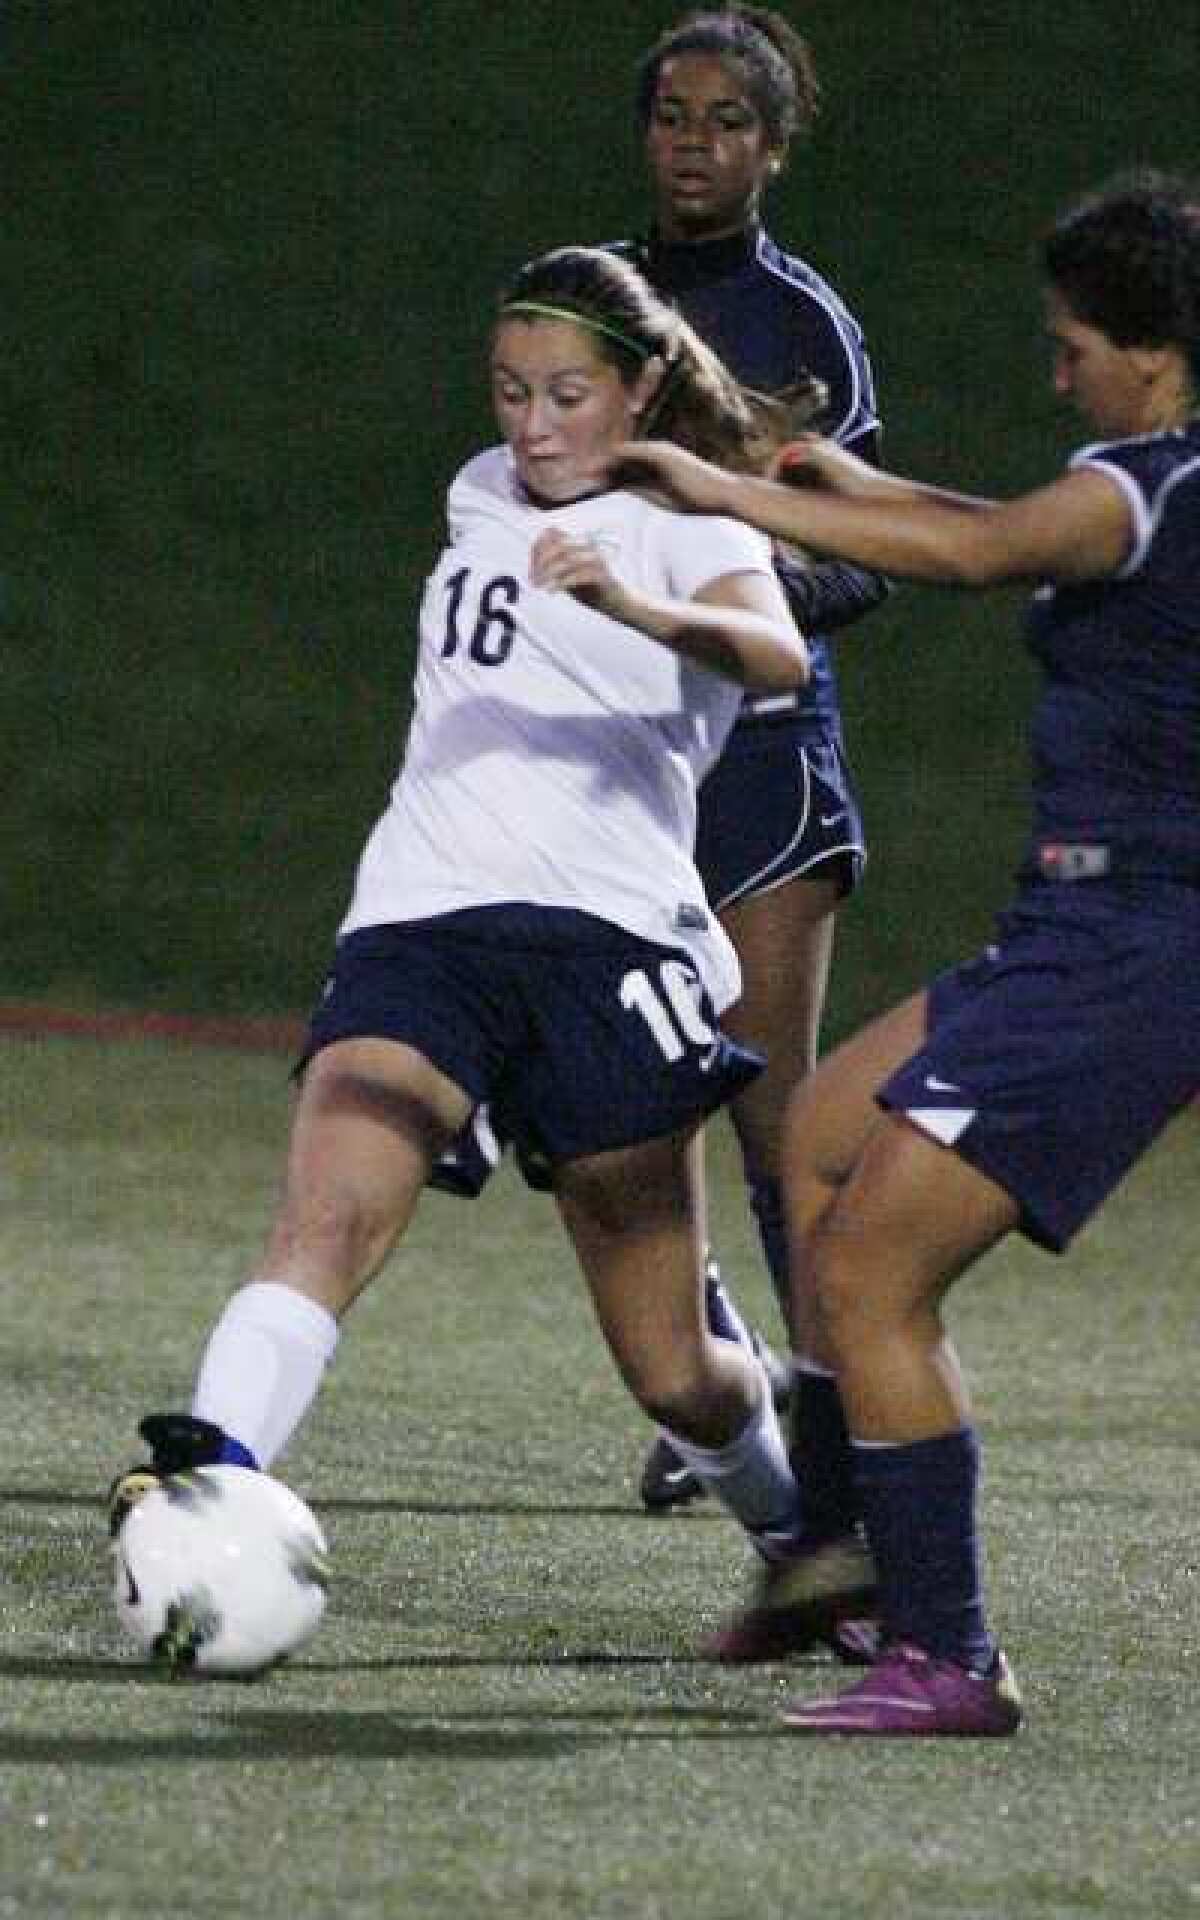 Flintridge Prep senior Kaelin King put the contest away with a goal in the 69th minute, her second of the match.